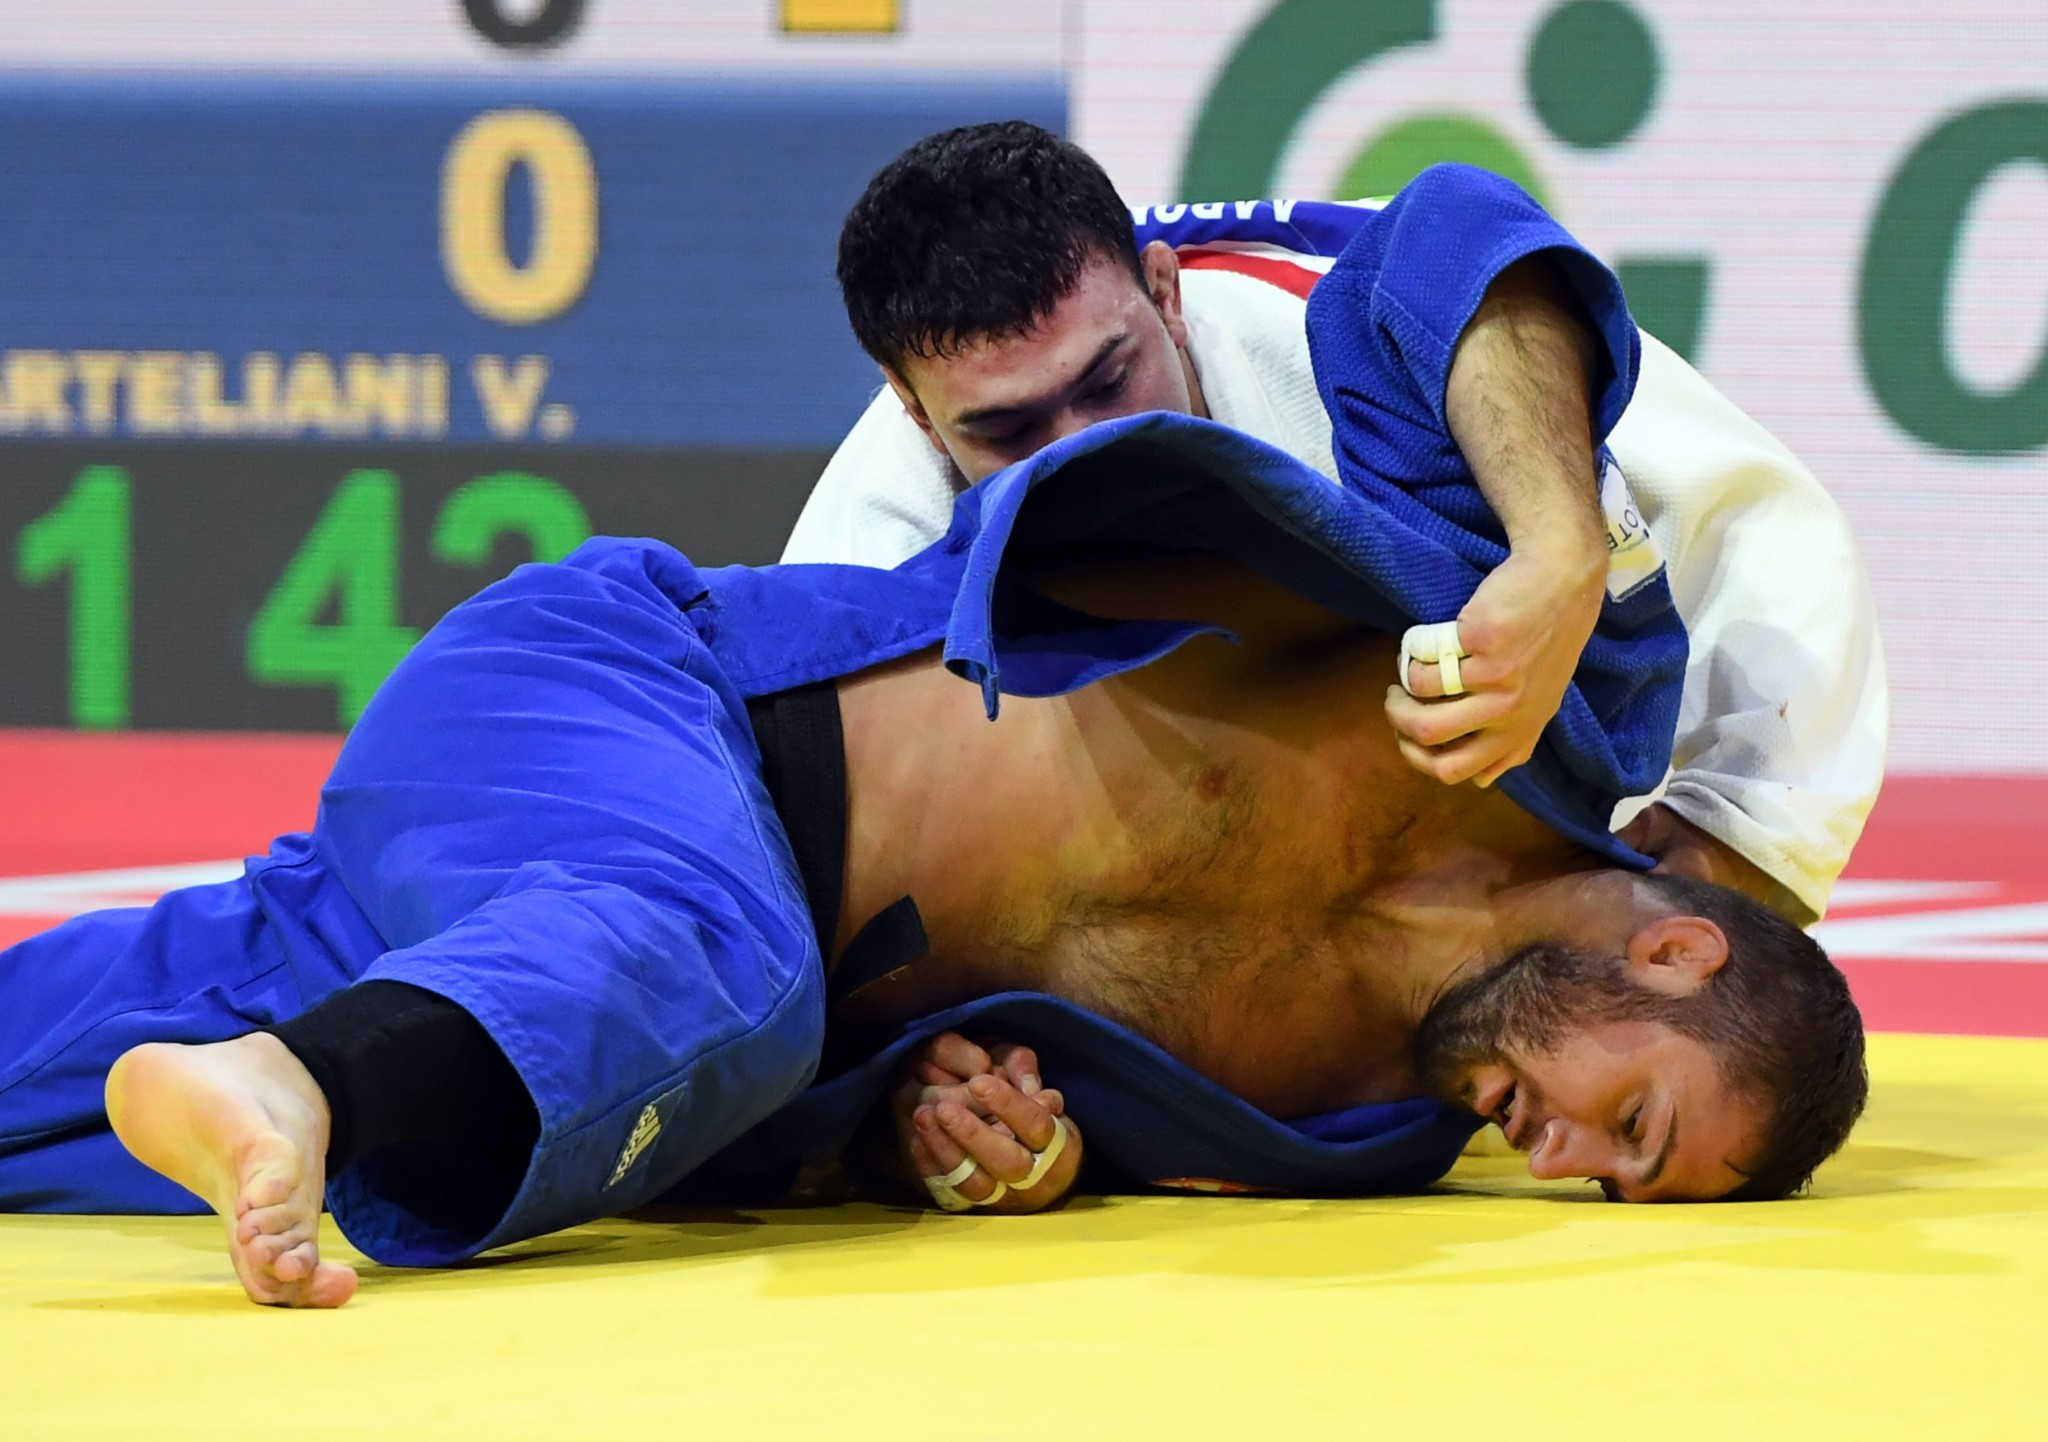 Japan's Aaron Wolf claimed the country's seventh gold medal of the Championships by winning the under 100kg division ©Getty Images